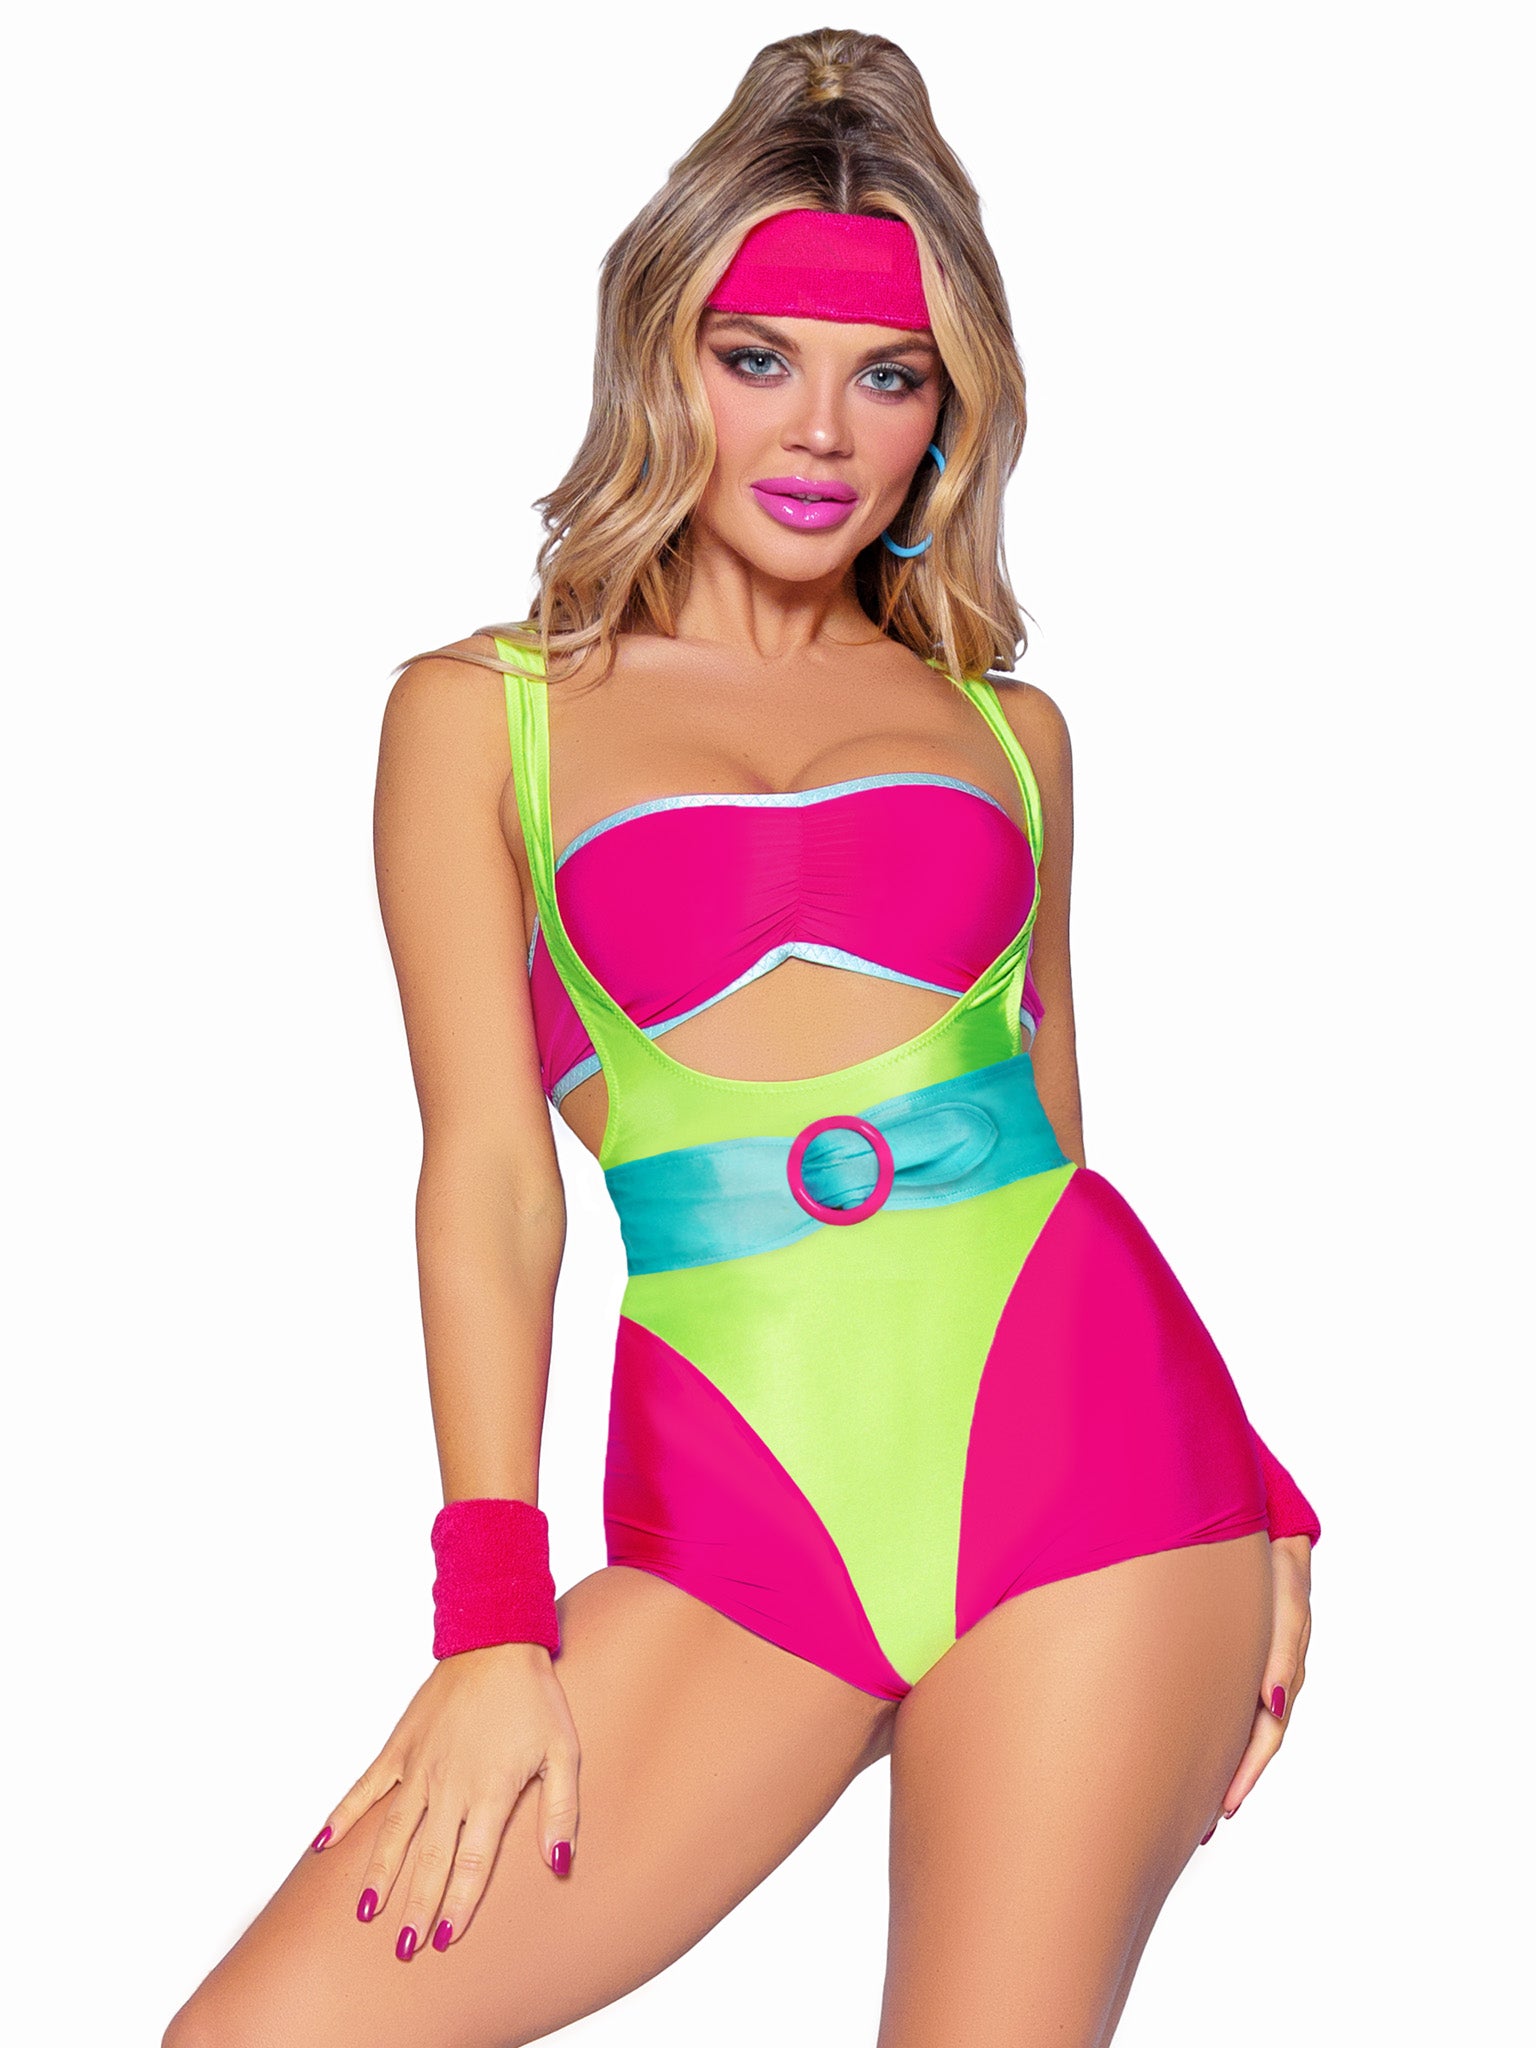 Women's 80s Workout Costume - Large